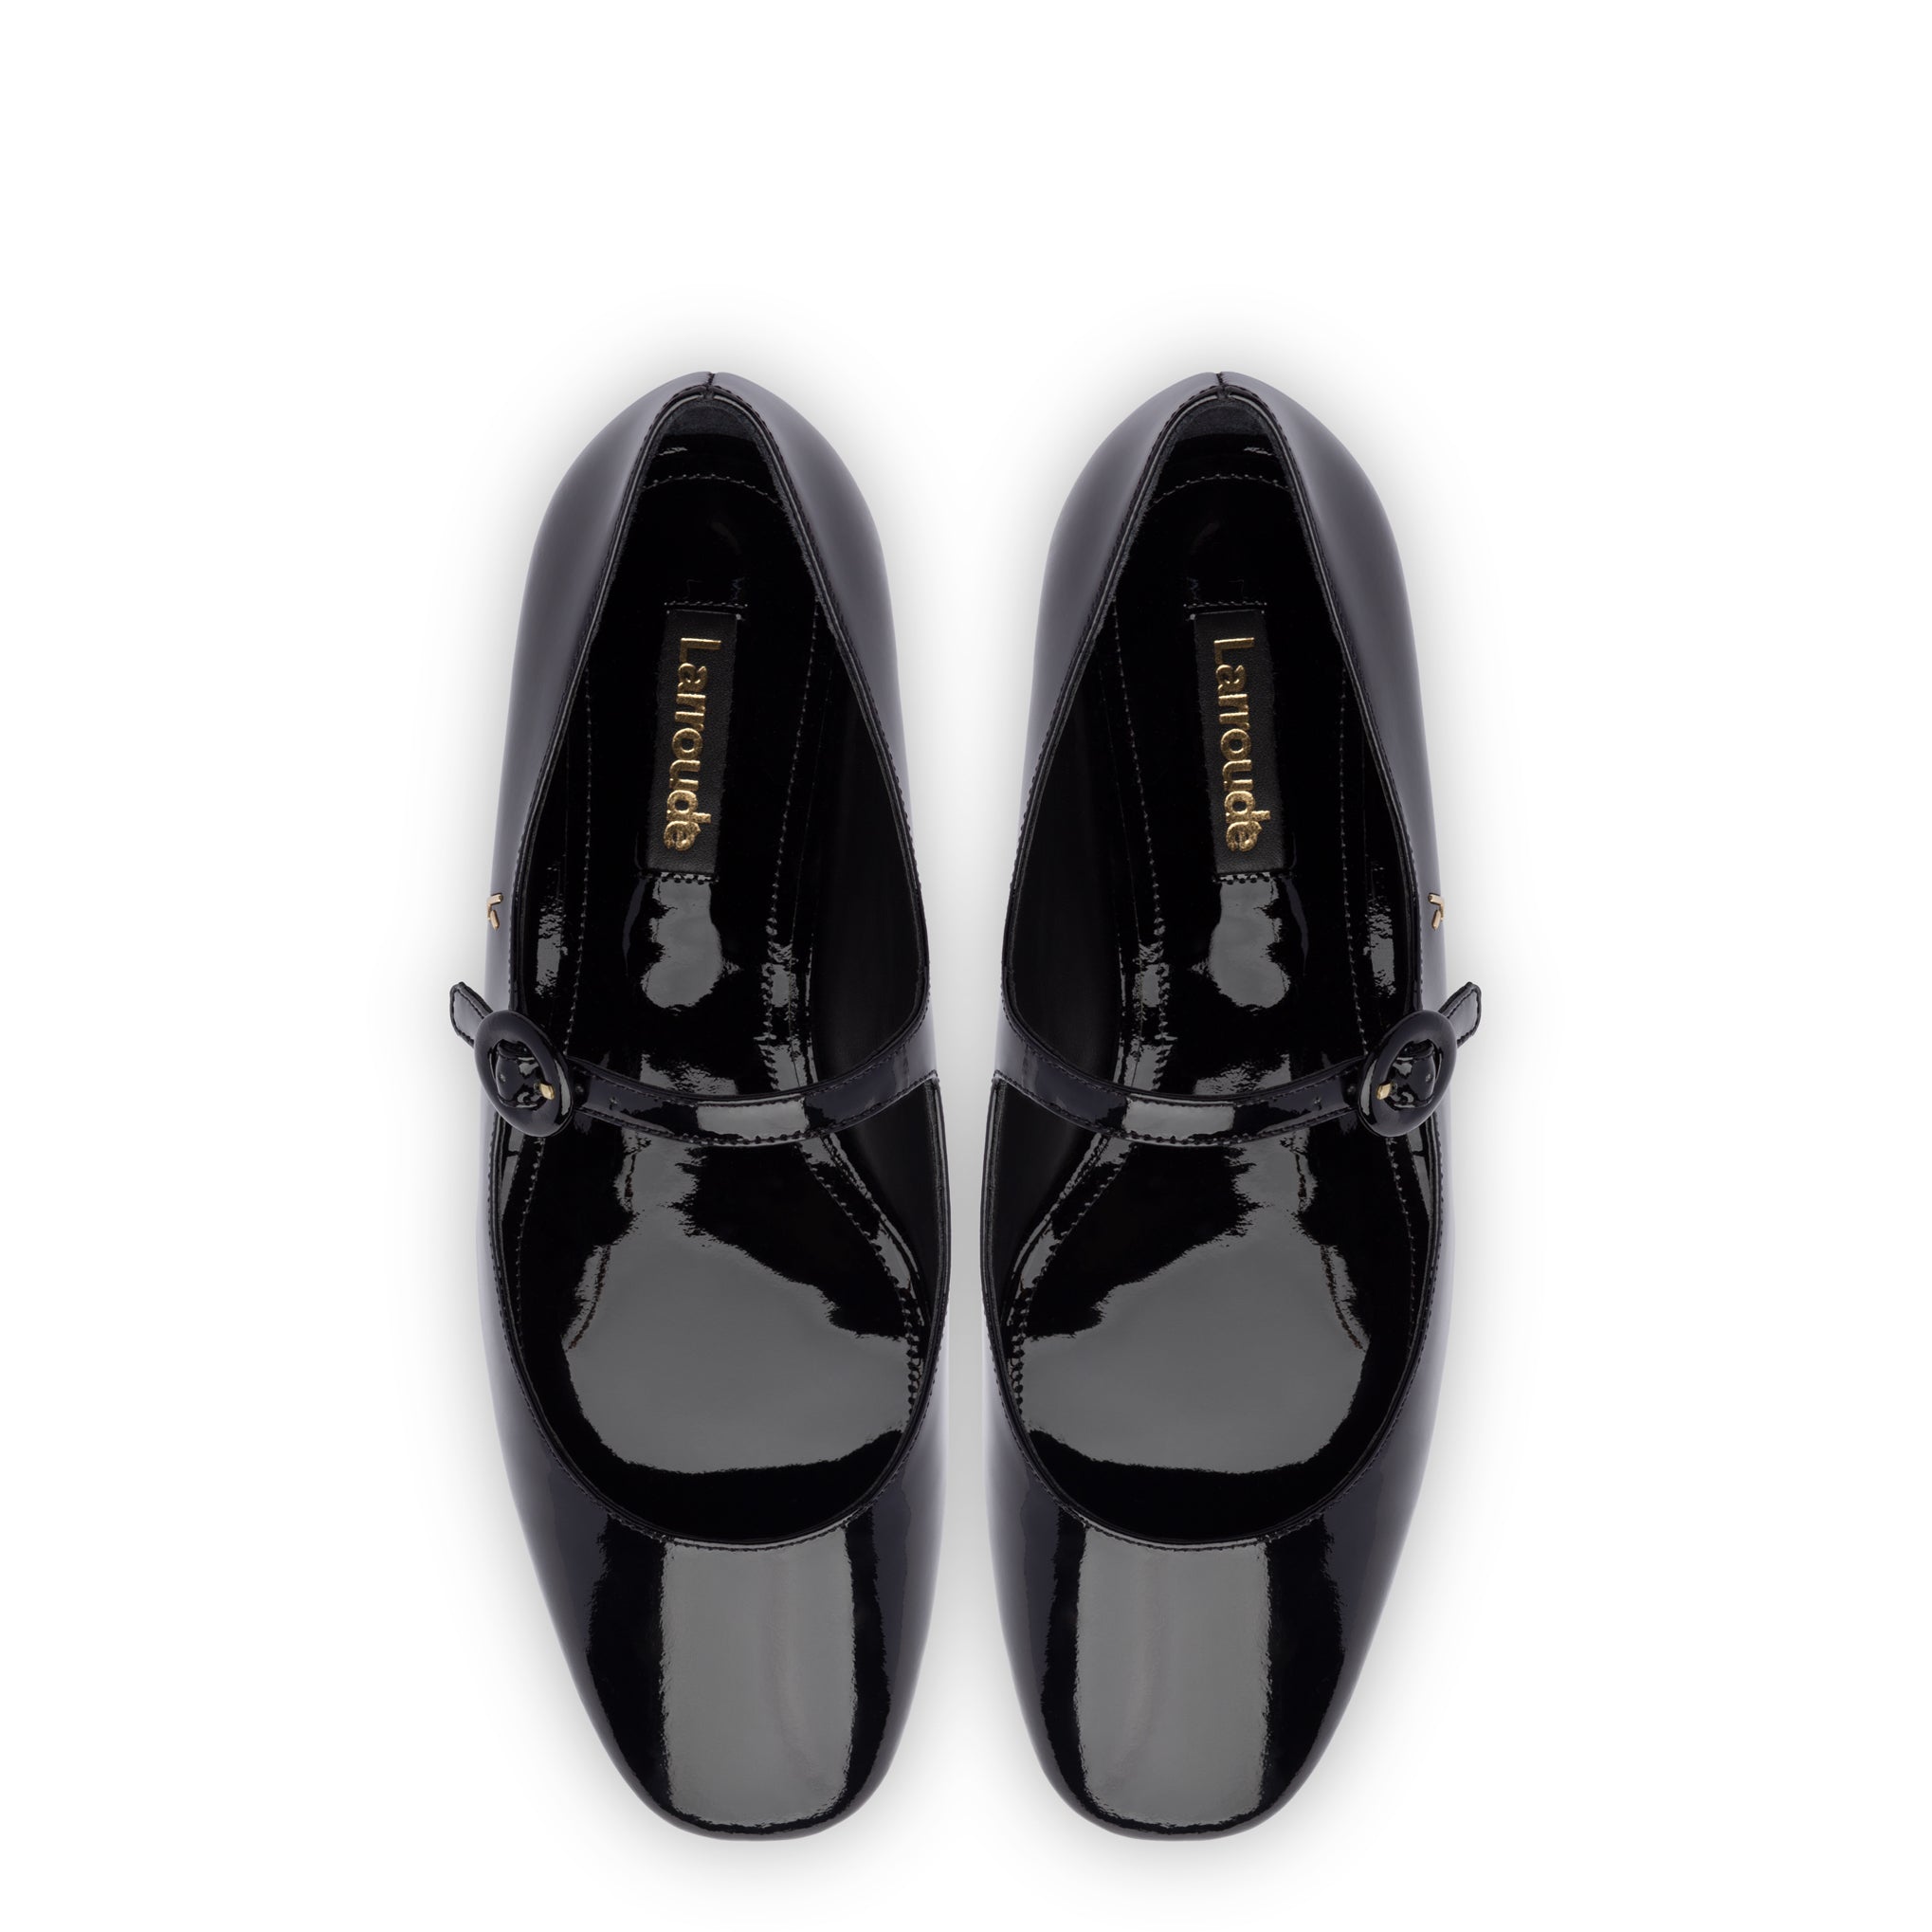 LEATHER MARY-JANE FLATS - BLACK - COS